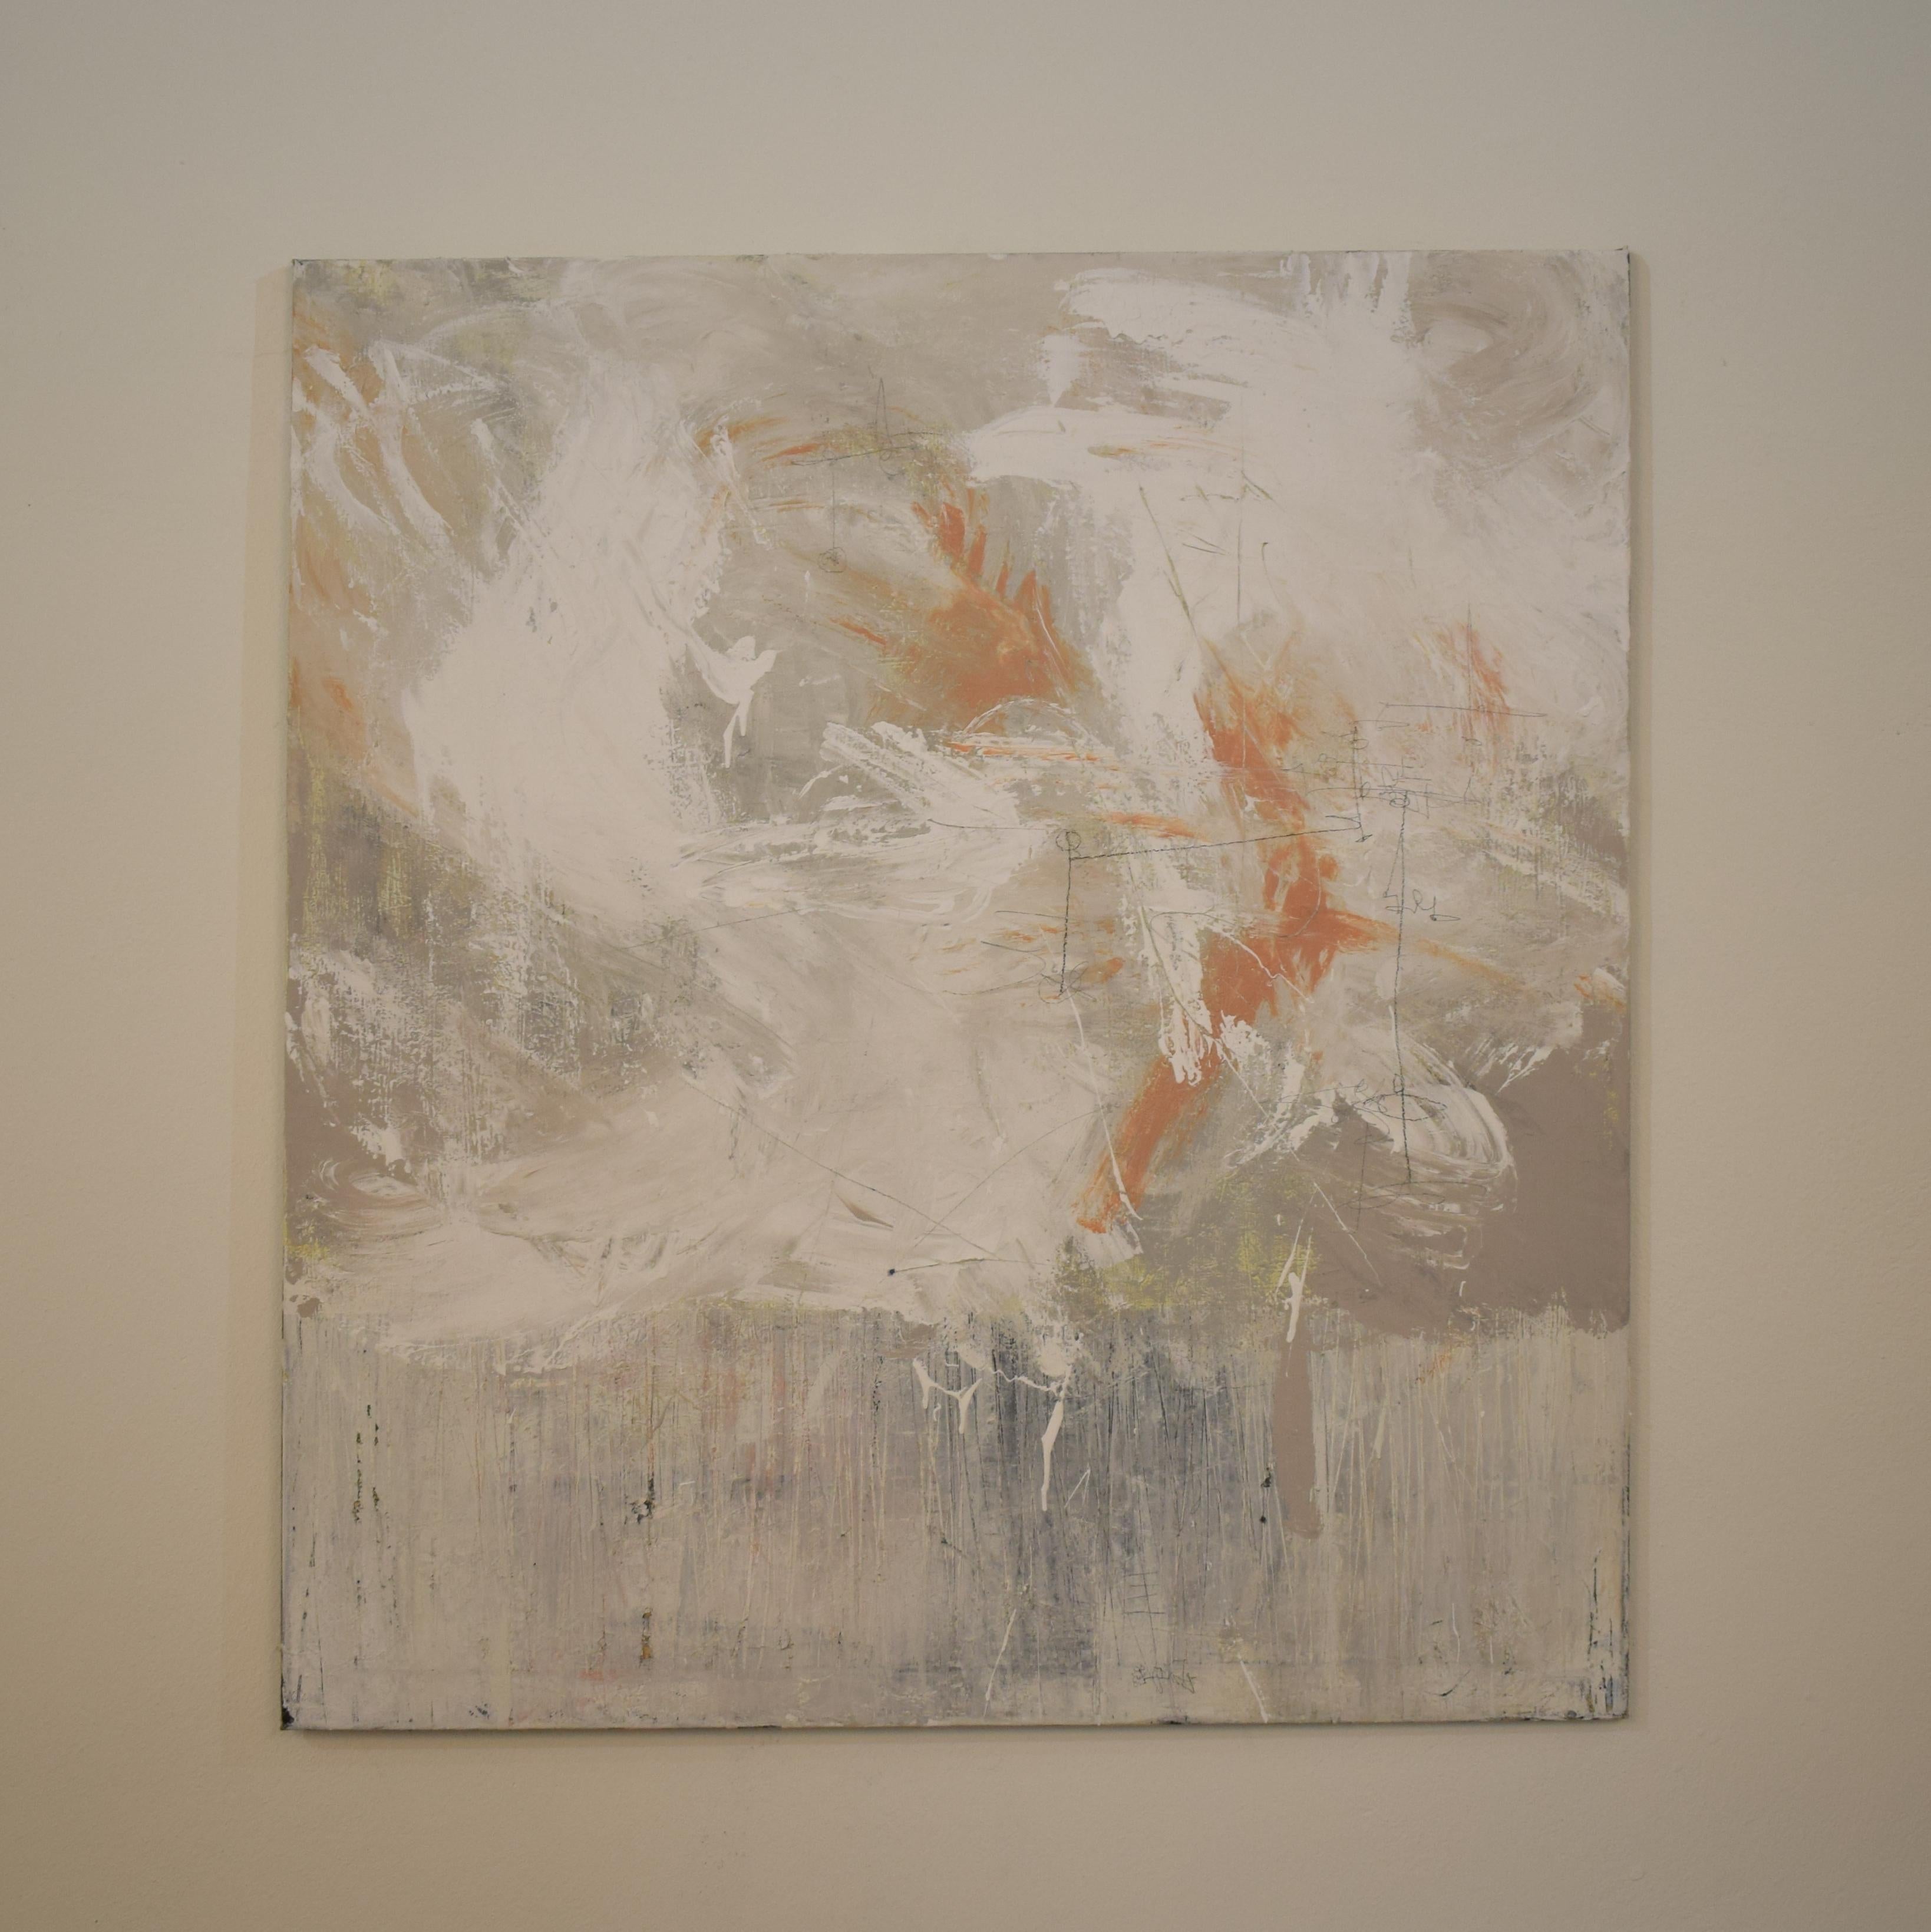 This painting has heavily textured acrylics in shades of greys, orange and white on canvas.
The artist created the piece using multiple techniques like palette knife, brush and chalk. The black lines are done with chalk.
The painting would